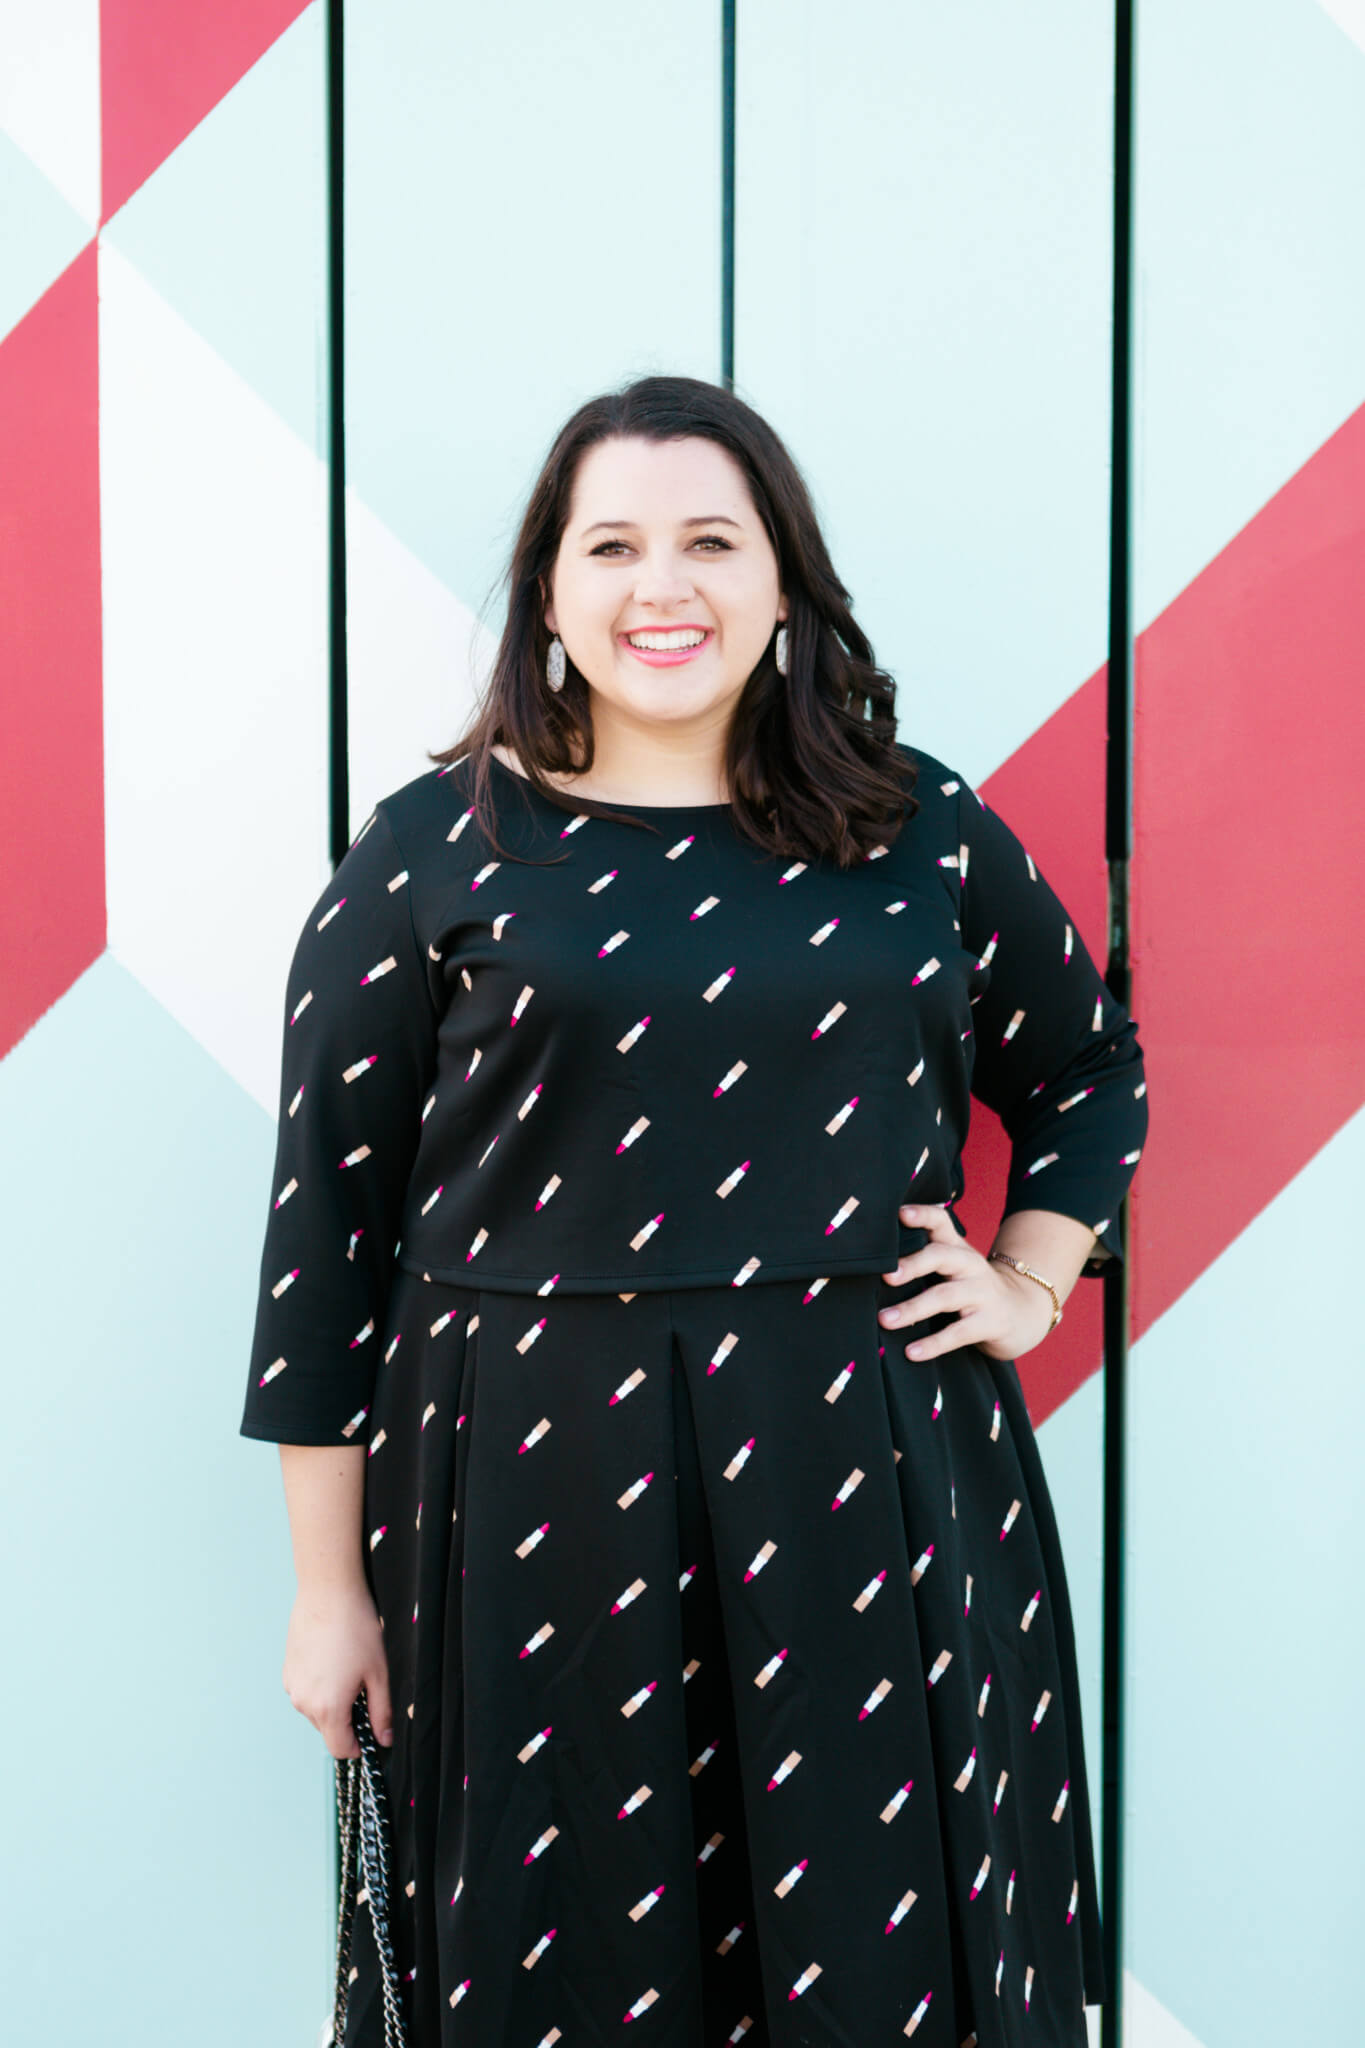 Emily Bastedo, the blogger behind curvy style blog, Something Gold, Something Blue shares this girly lipstick print matching set from the Ashley Nell Tipton collection for Boutique+ at JCPenney. She has styled this all black outfit with dainty silver accesorries.